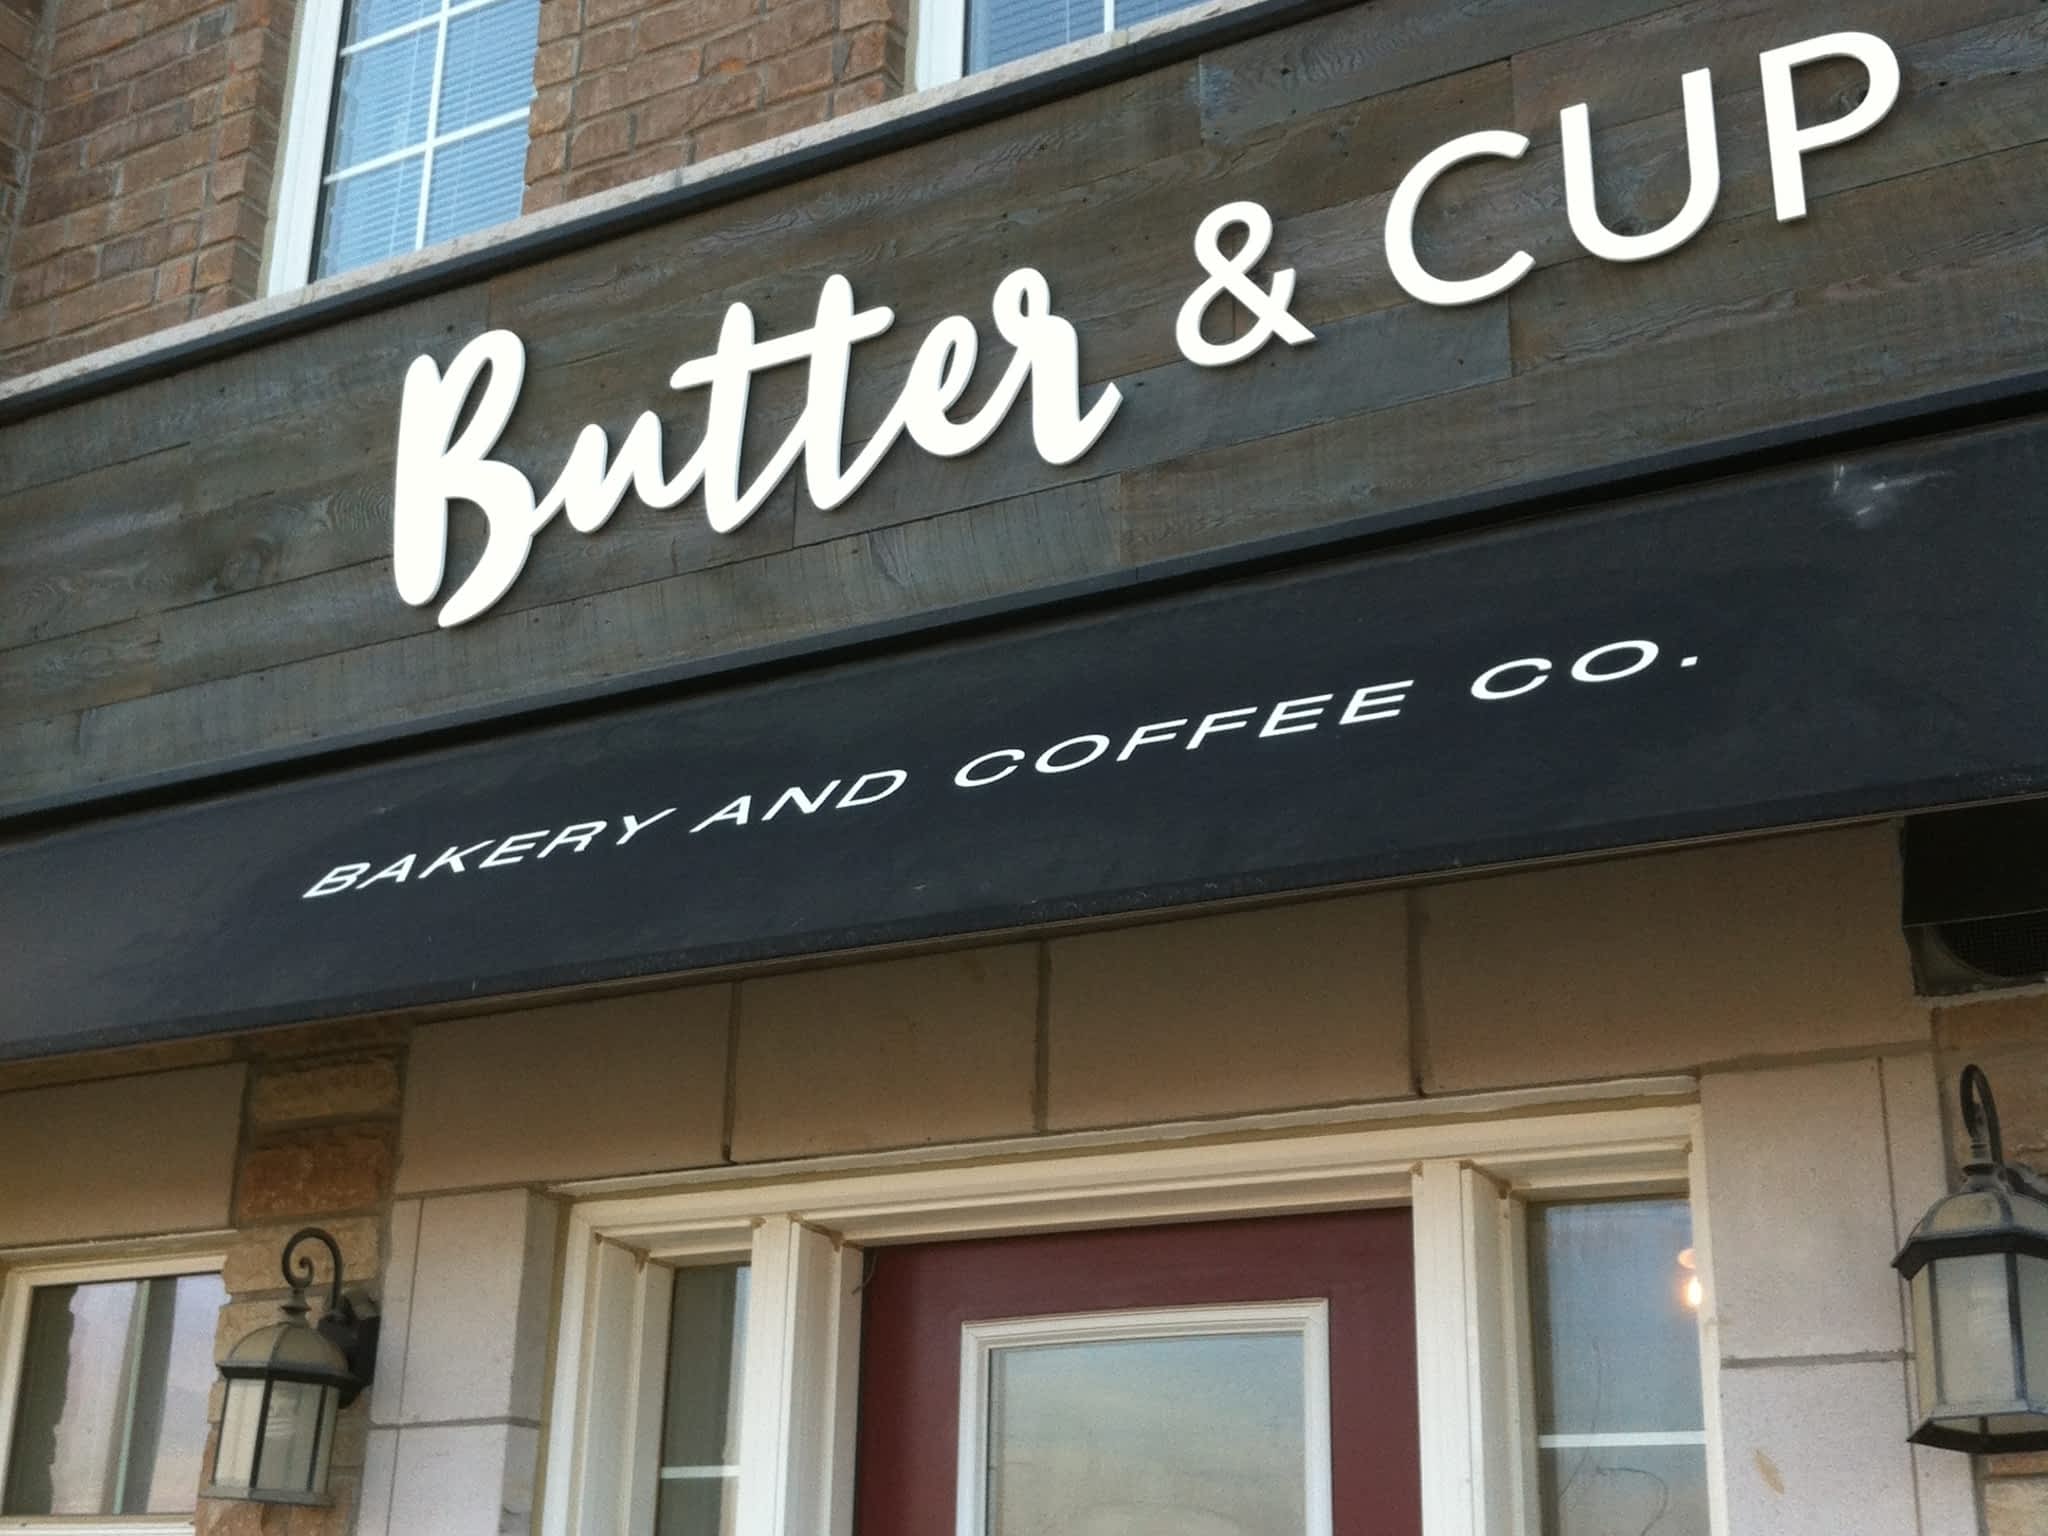 photo Butter & Cup & Bakery & Coffee Co